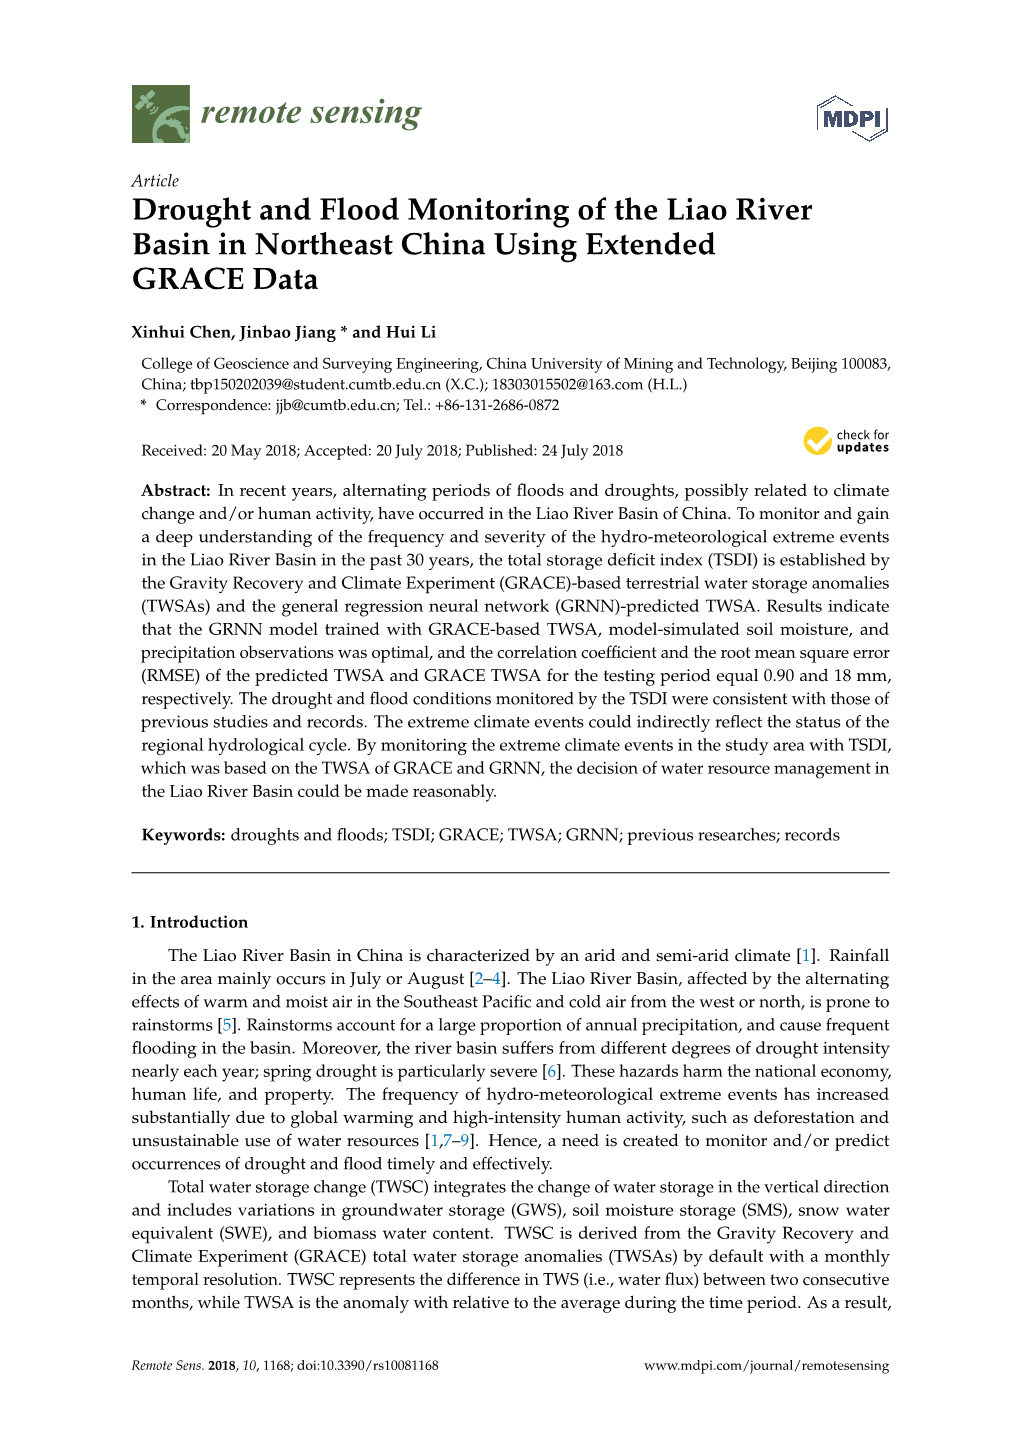 Drought and Flood Monitoring of the Liao River Basin in Northeast China Using Extended GRACE Data